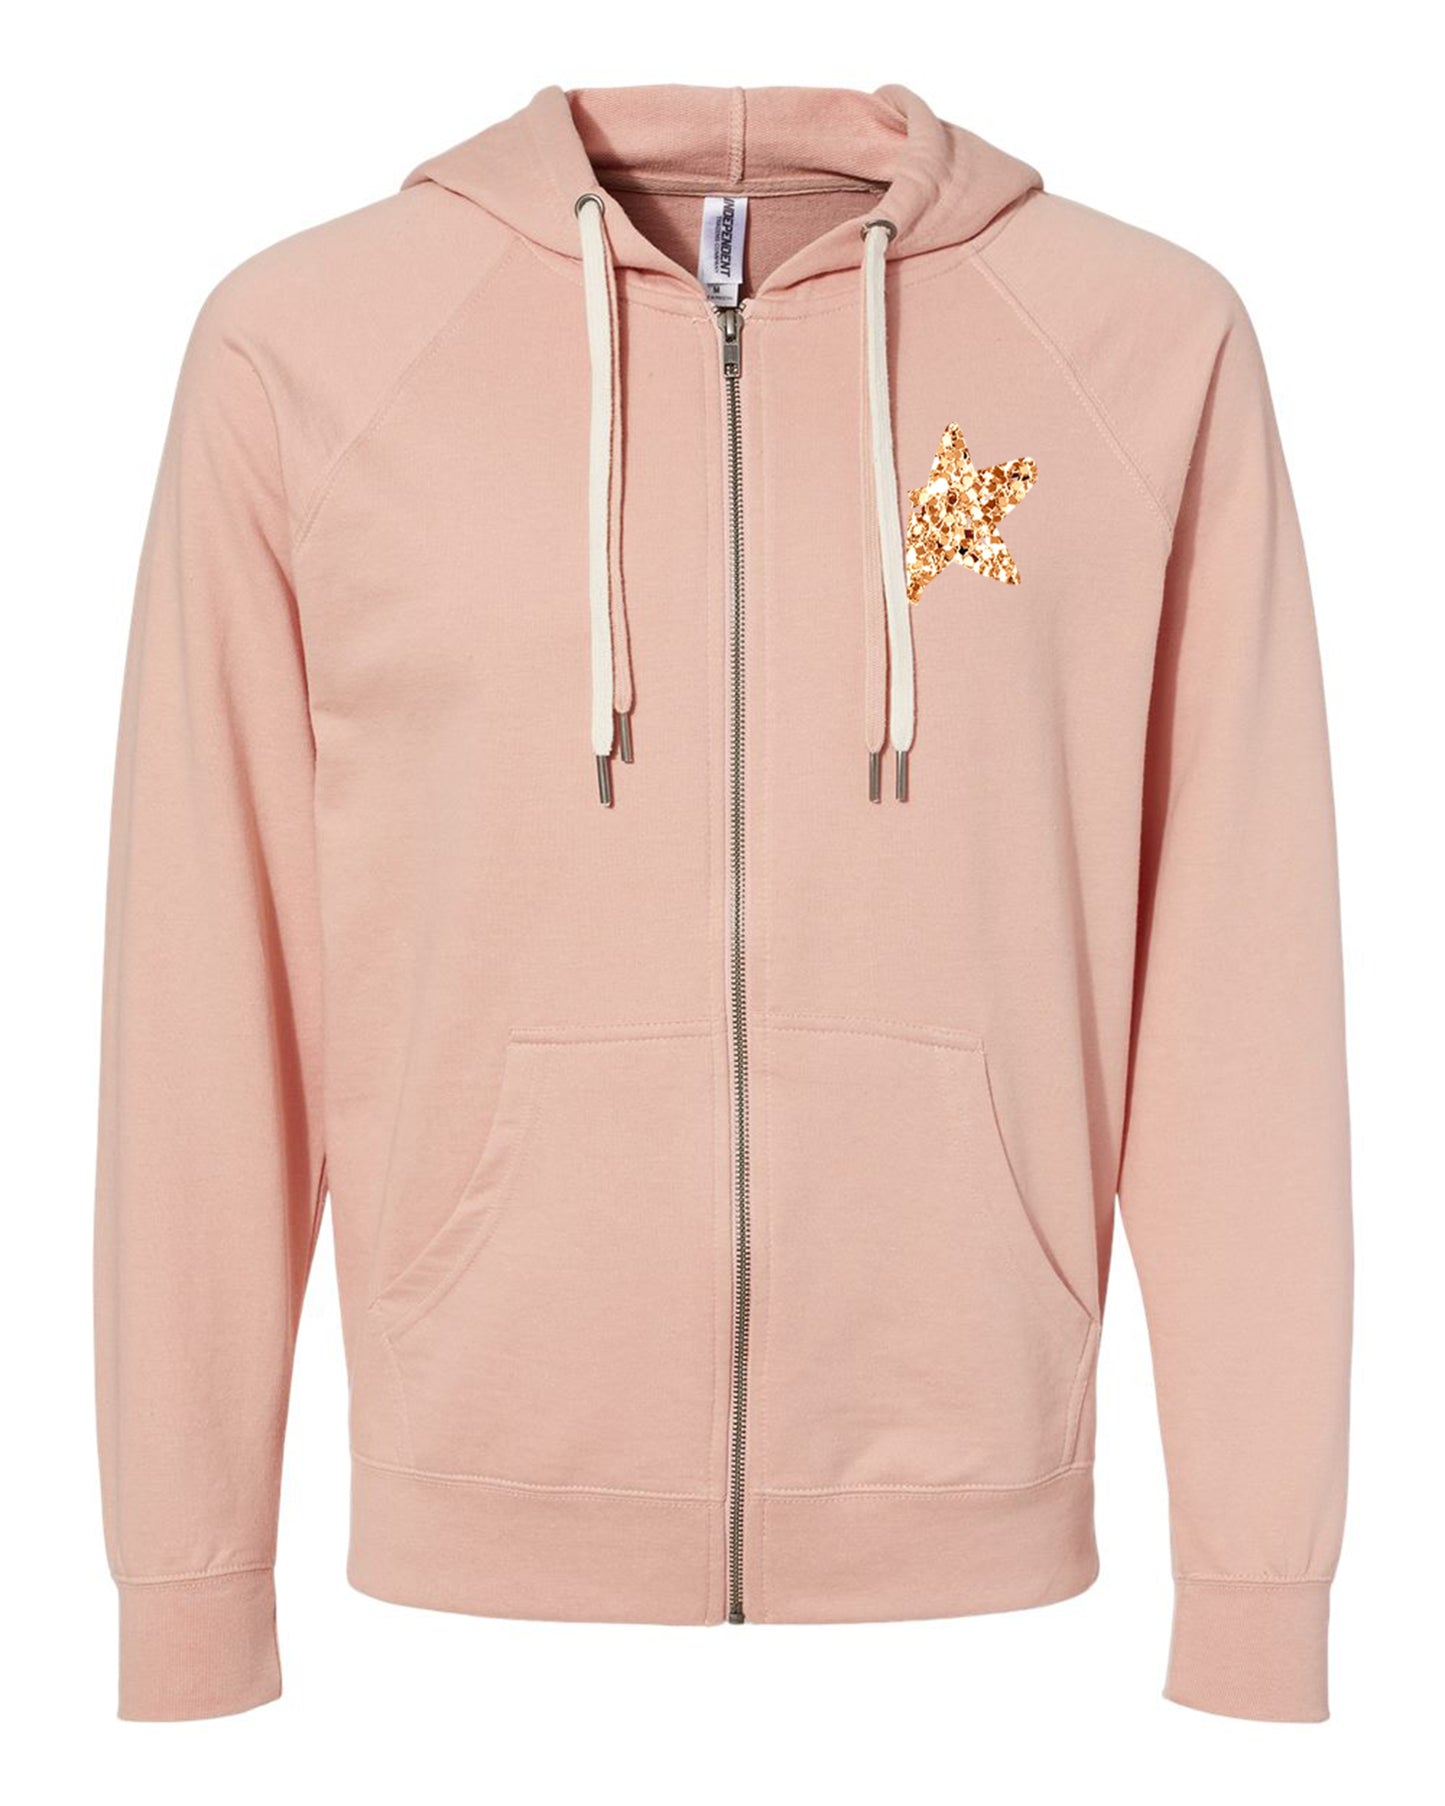 Just a Bit of Frenchie Bling French Bulldog Zip-up Fleece